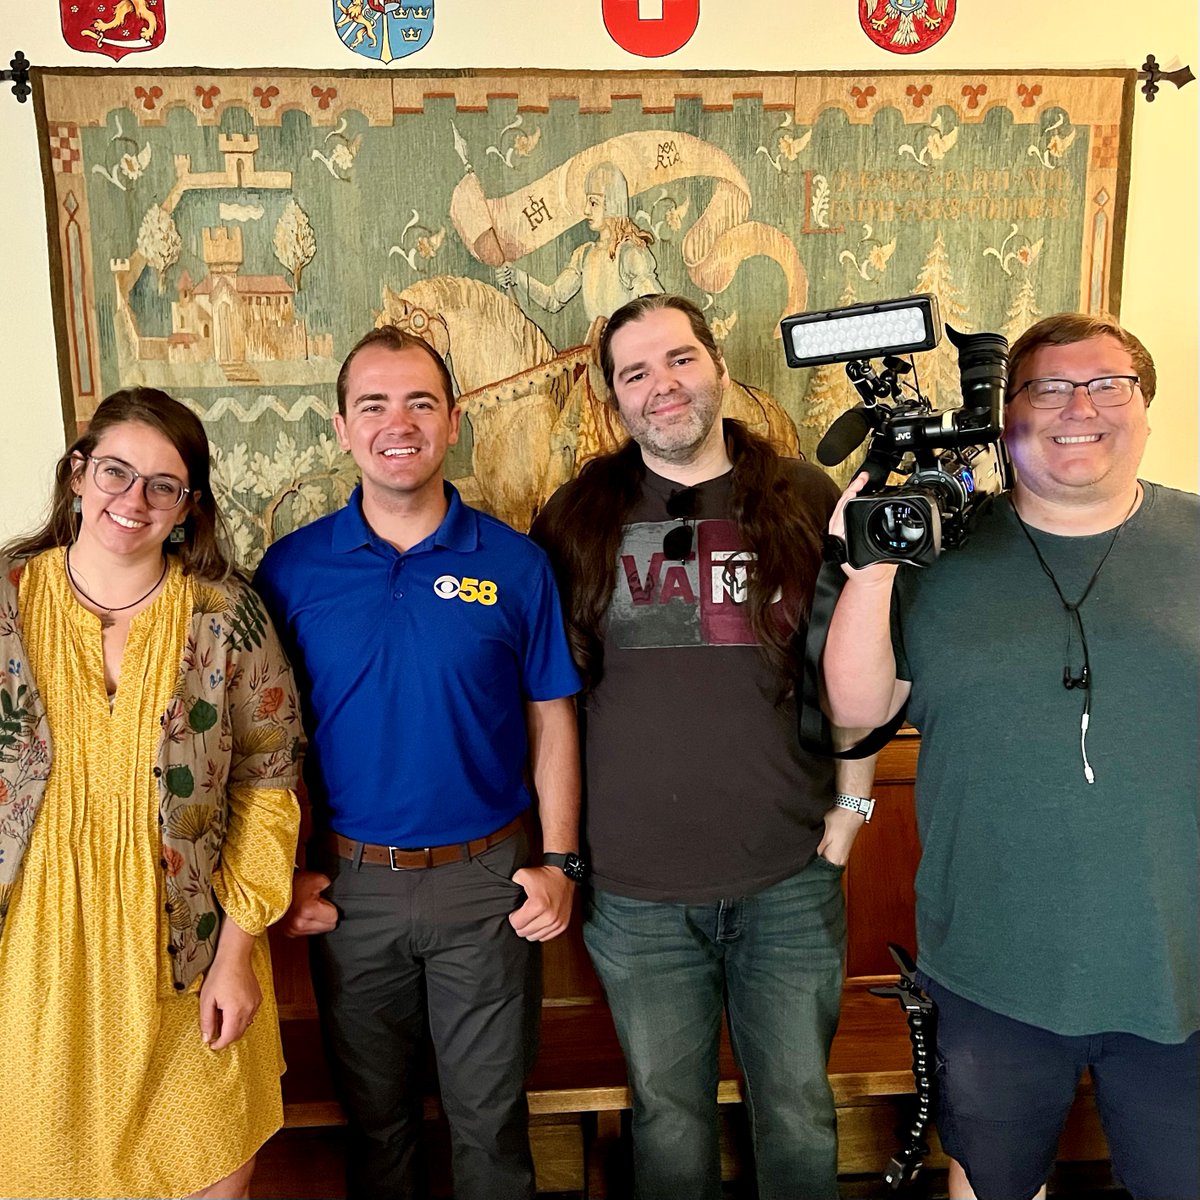 It was great to have @CBS58 and@lehmann_emerson at the Waelderhaus for their 58 Hometowns segment! #58hometowns takes viewers to the unique places we call home in Wisconsin. Keep an eye on their channel on Tue & Thur for their hometown segment. 

cbs58.com/hometowns